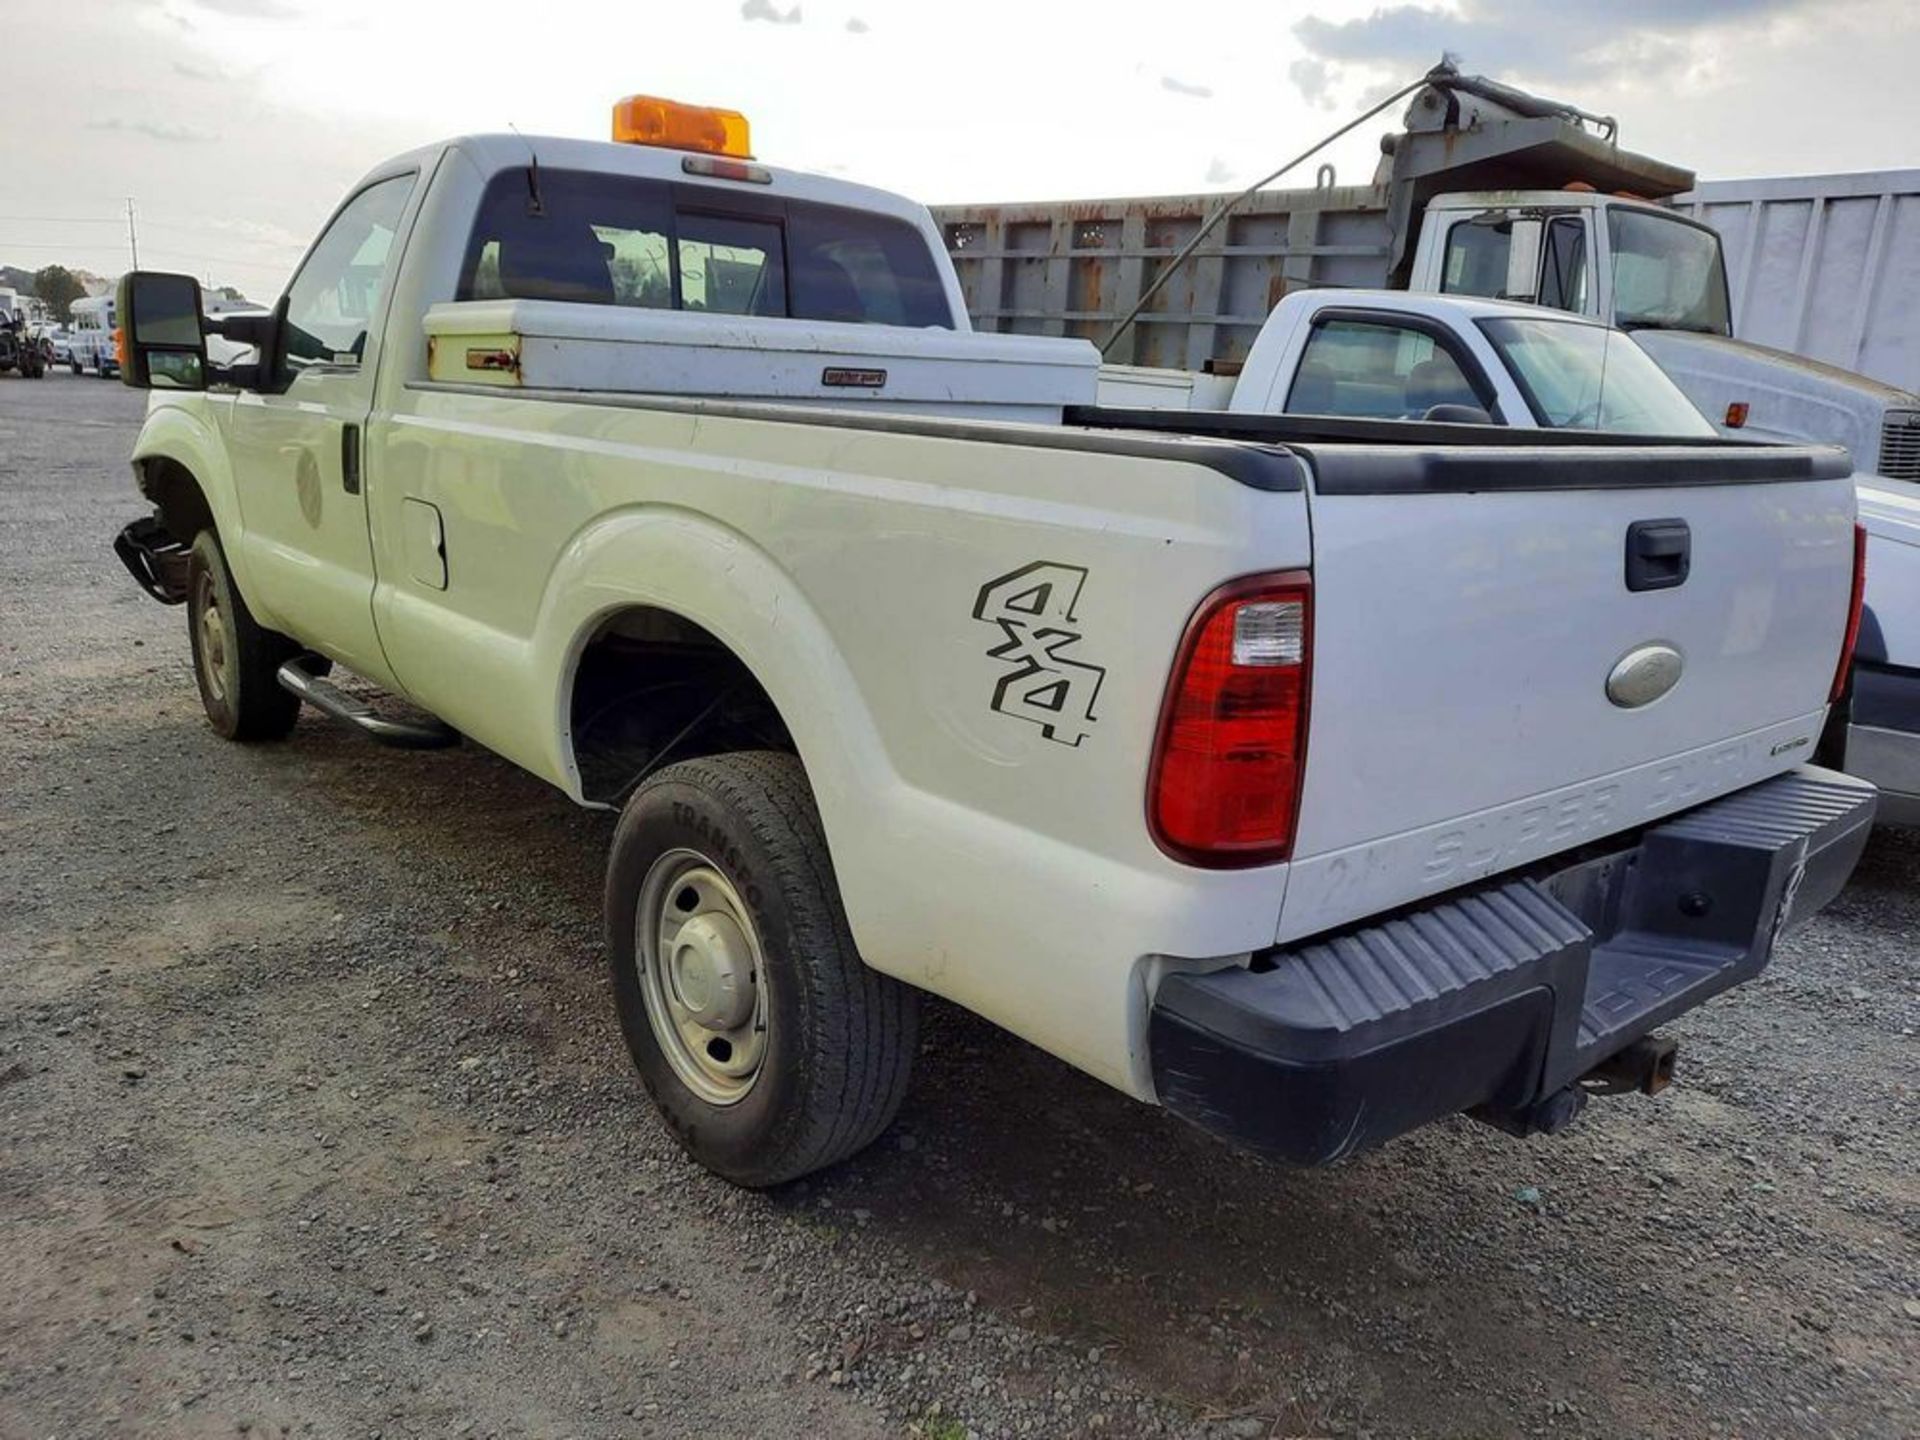 2012 FORD F350 4x4 PICK UP TRUCK (INOPERABLE) (HC UNIT: HC-2102-057) - Image 2 of 5